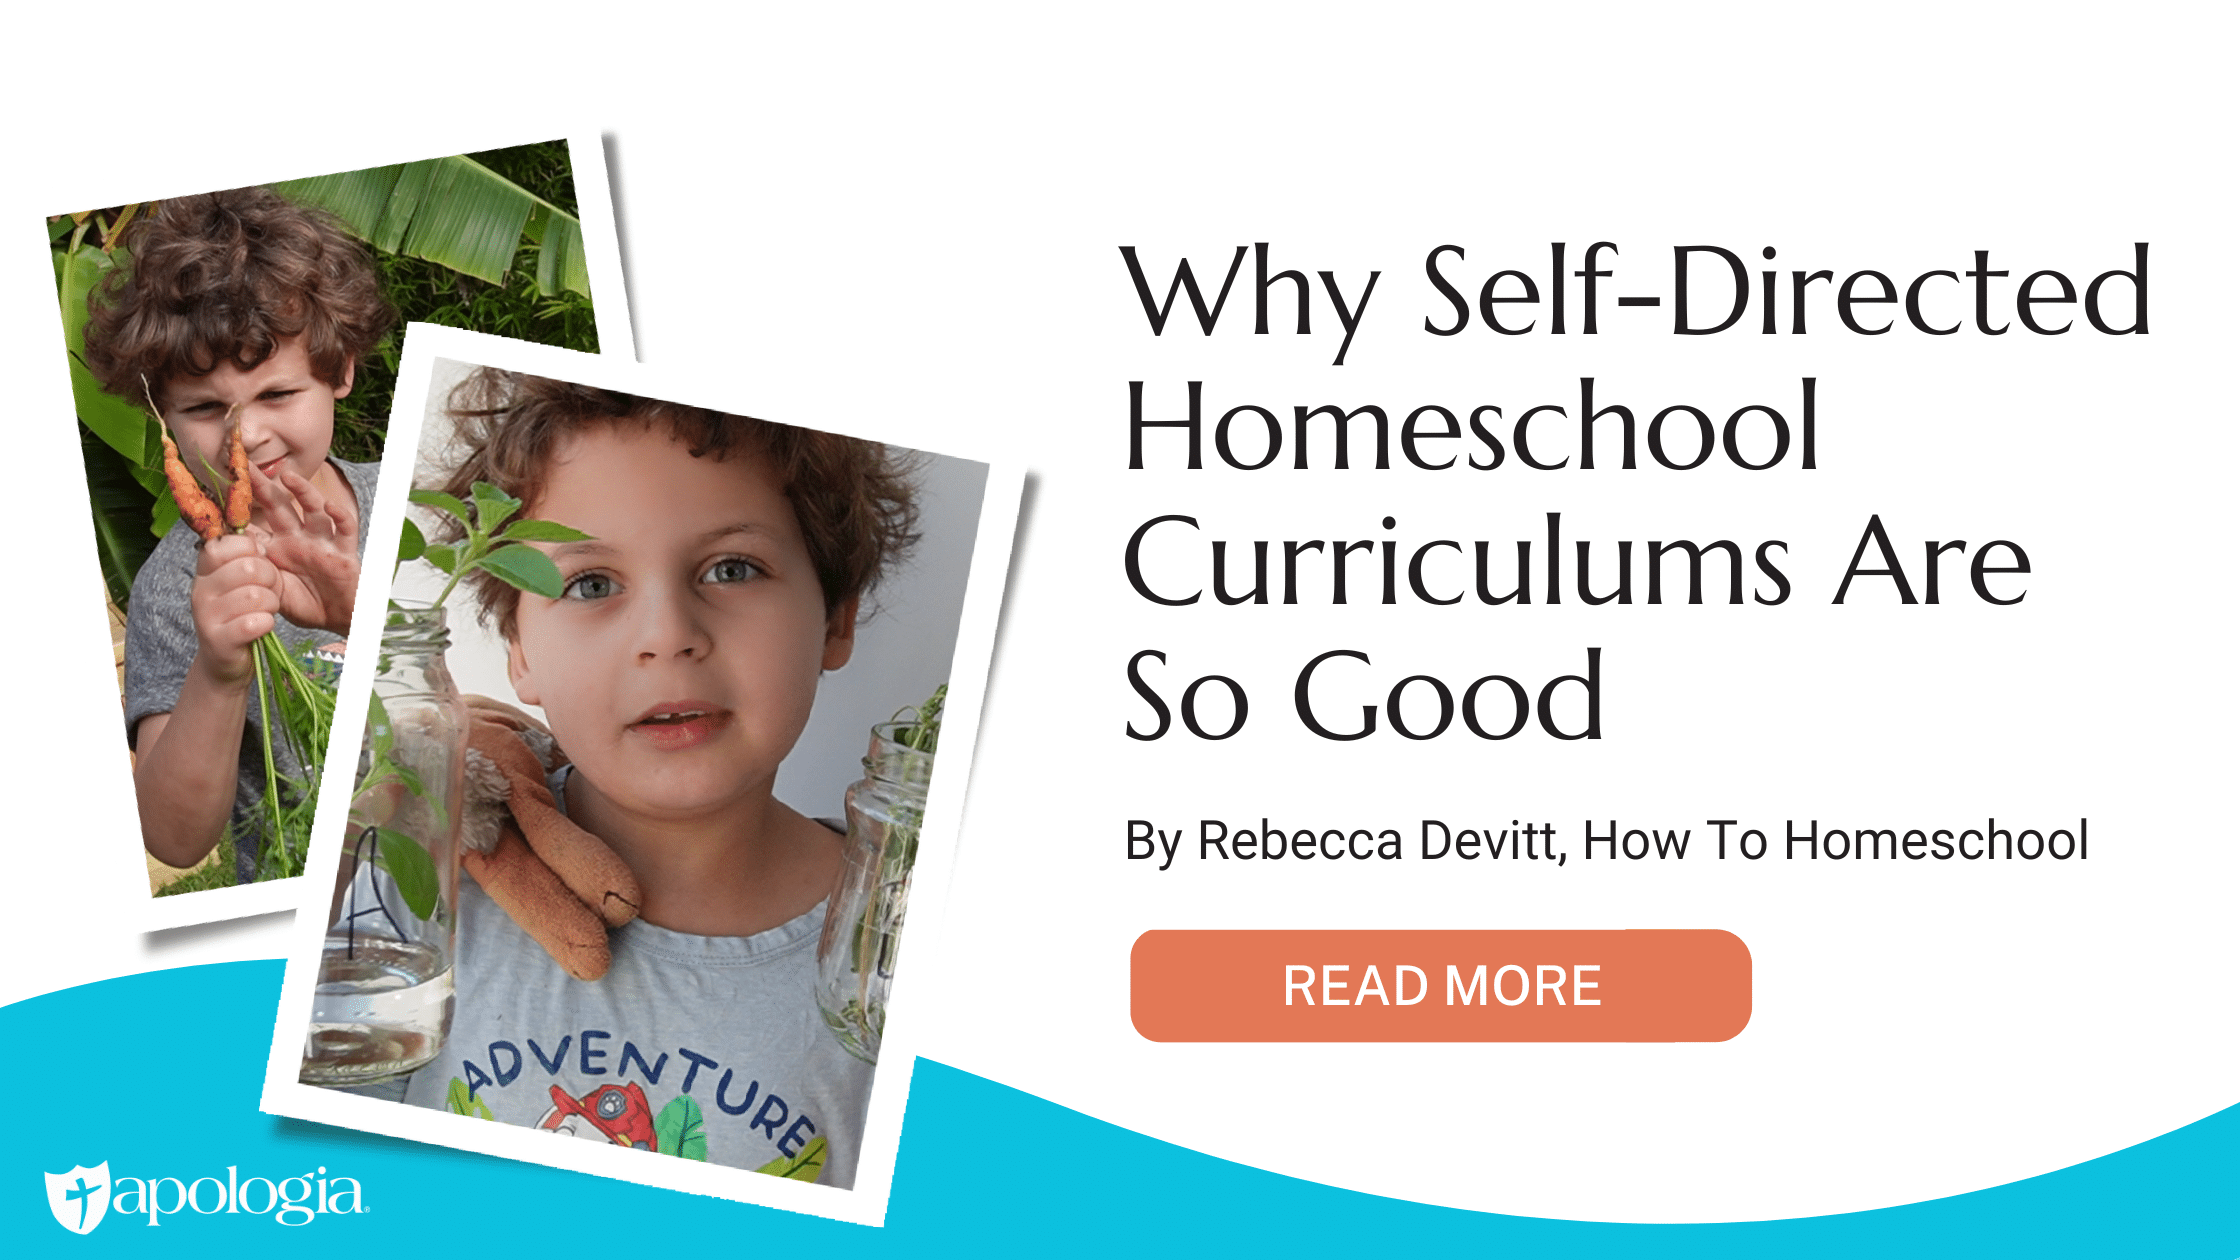 Why Self-Directed Homeschool Curriculums Are So Good!